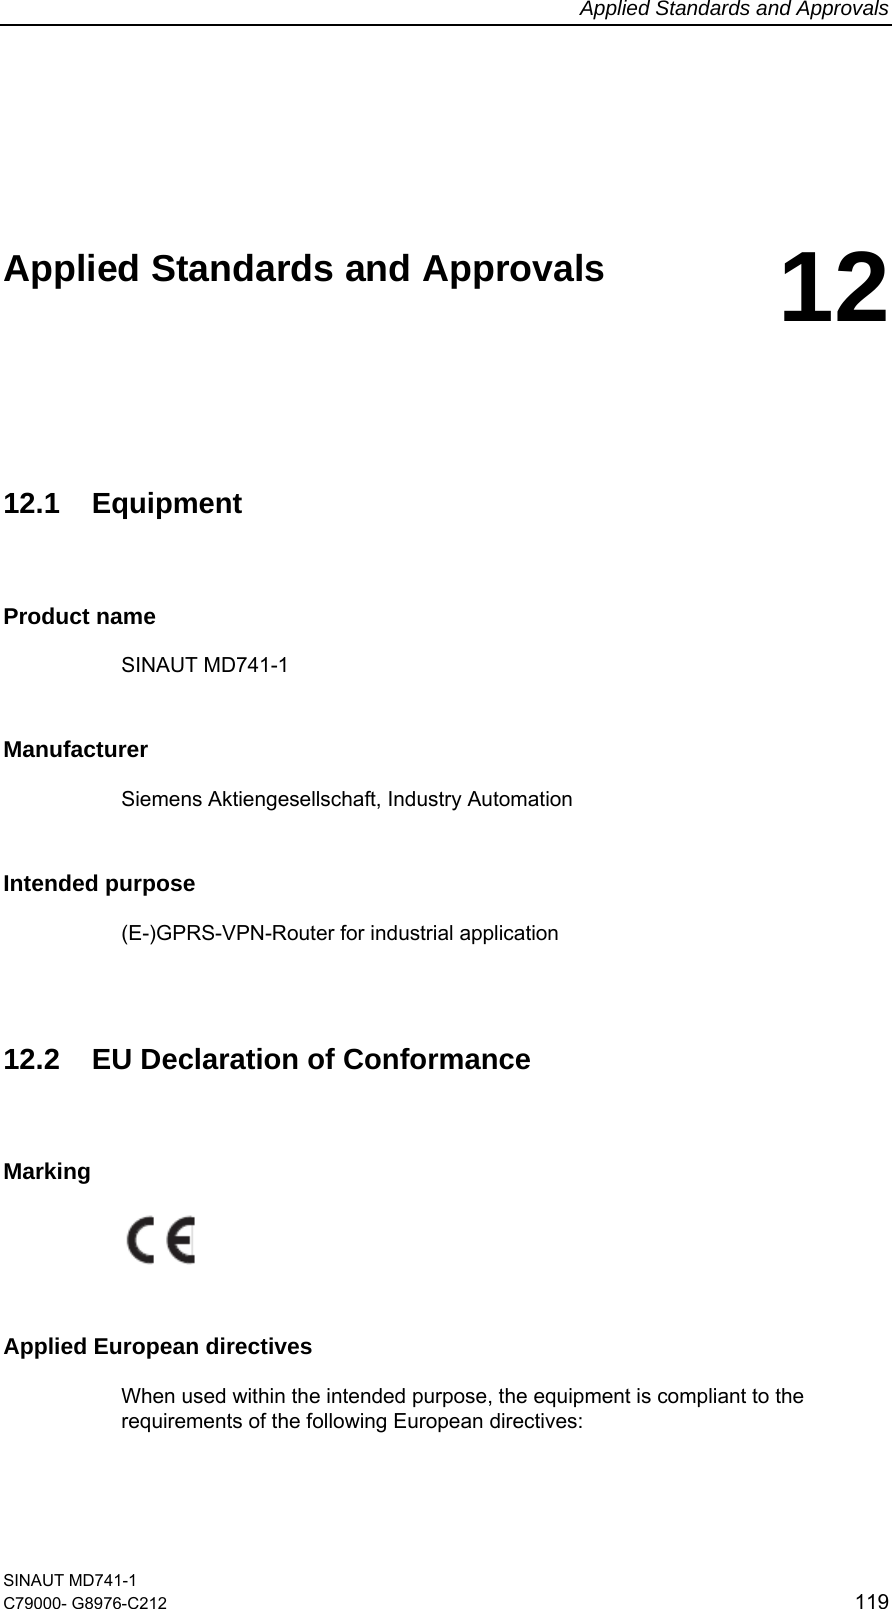 Applied Standards and Approvals SINAUT MD741-1 C79000- G8976-C212  119    Applied Standards and Approvals  12   12.1 Equipment Product name SINAUT MD741-1 Manufacturer Siemens Aktiengesellschaft, Industry Automation Intended purpose (E-)GPRS-VPN-Router for industrial application   12.2  EU Declaration of Conformance Marking  Applied European directives When used within the intended purpose, the equipment is compliant to the requirements of the following European directives: 